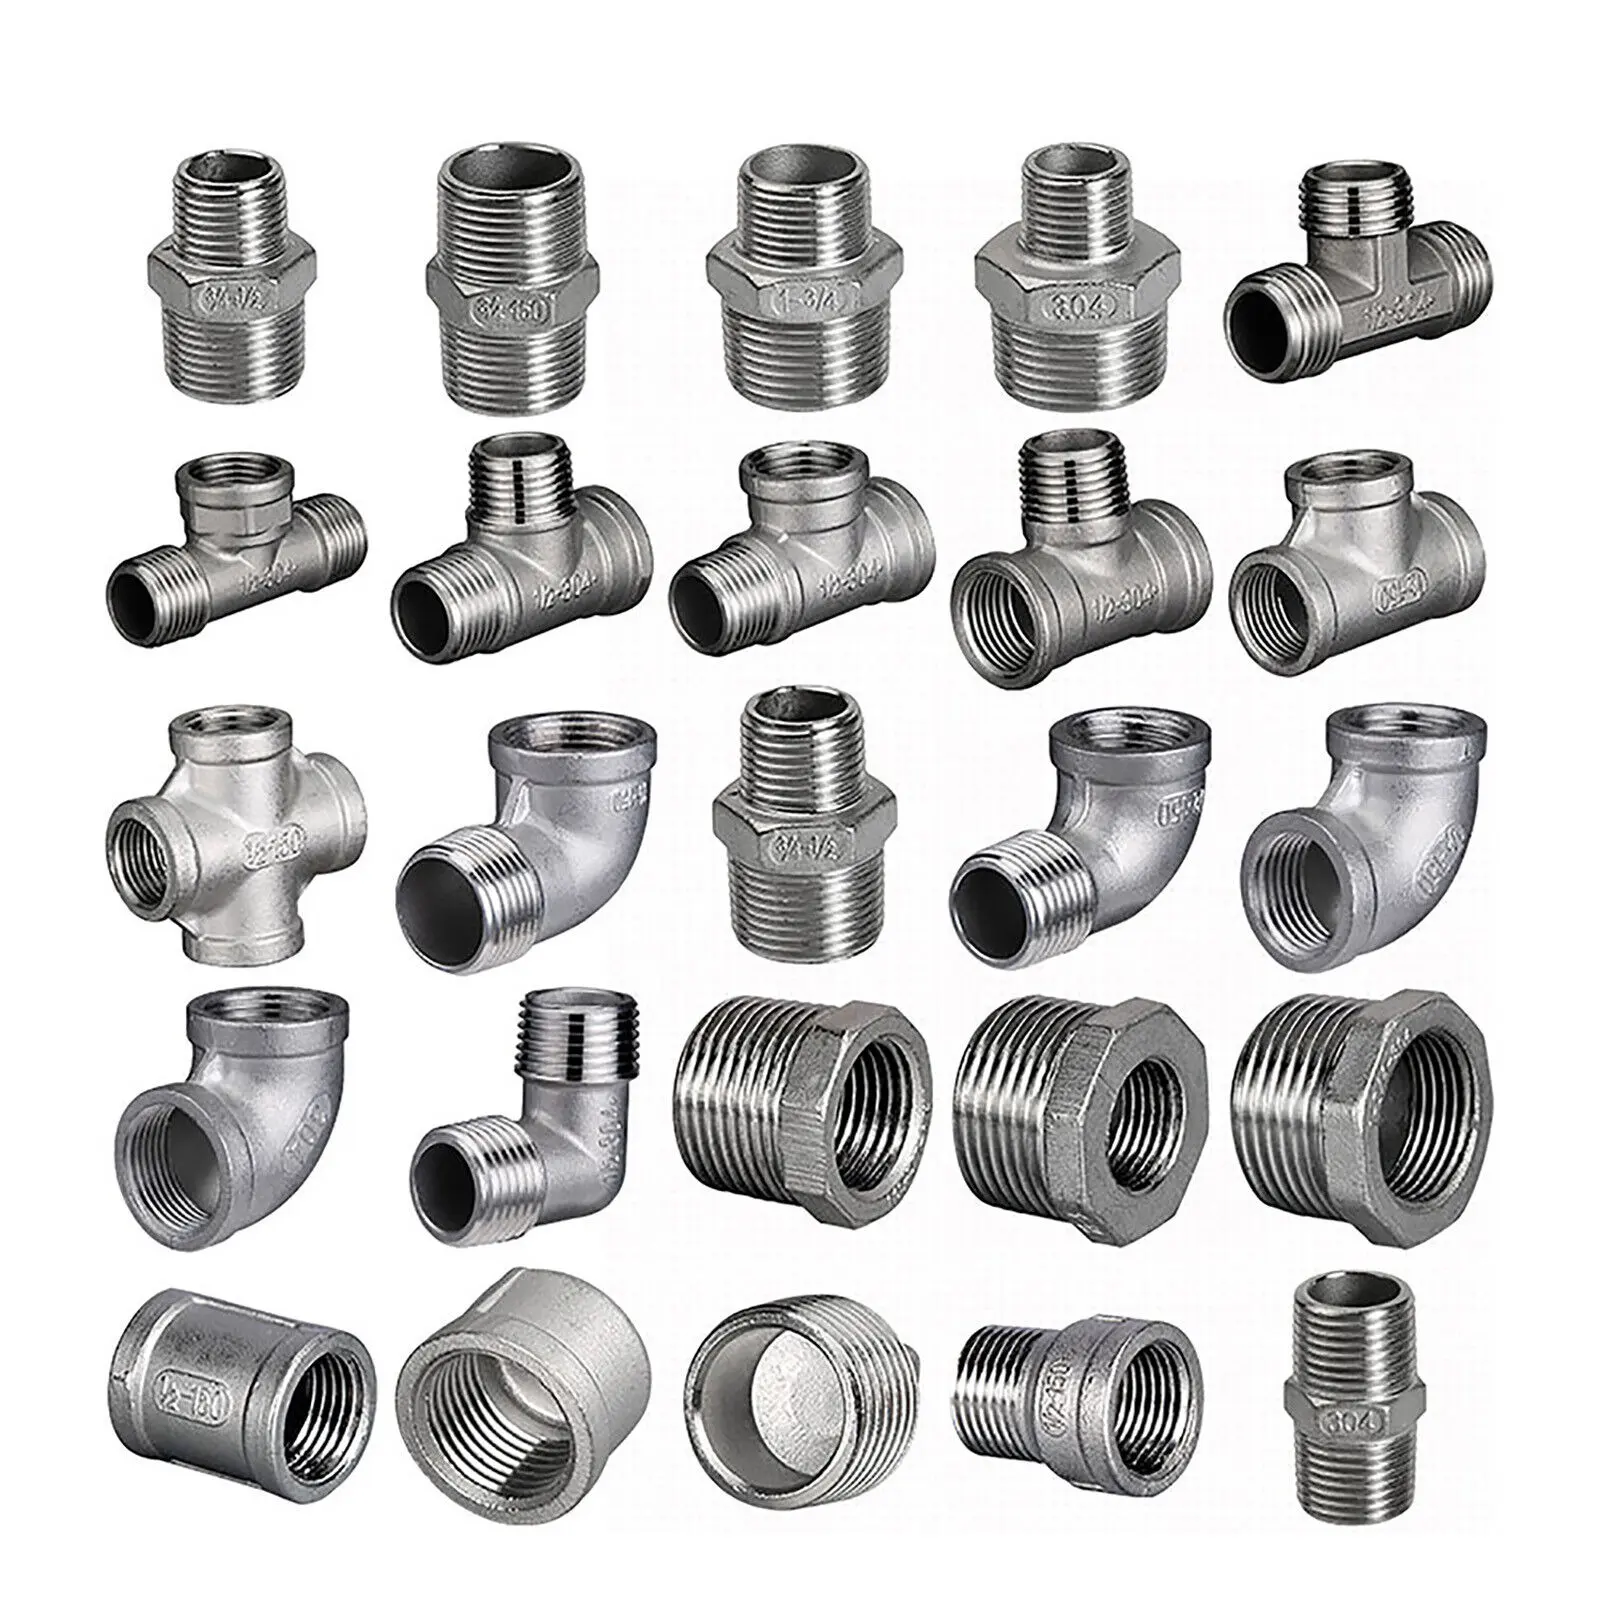 Water pipe joint fittings  steel pipes  agricultural welding fittings  stainless steel industrial pipe fittings